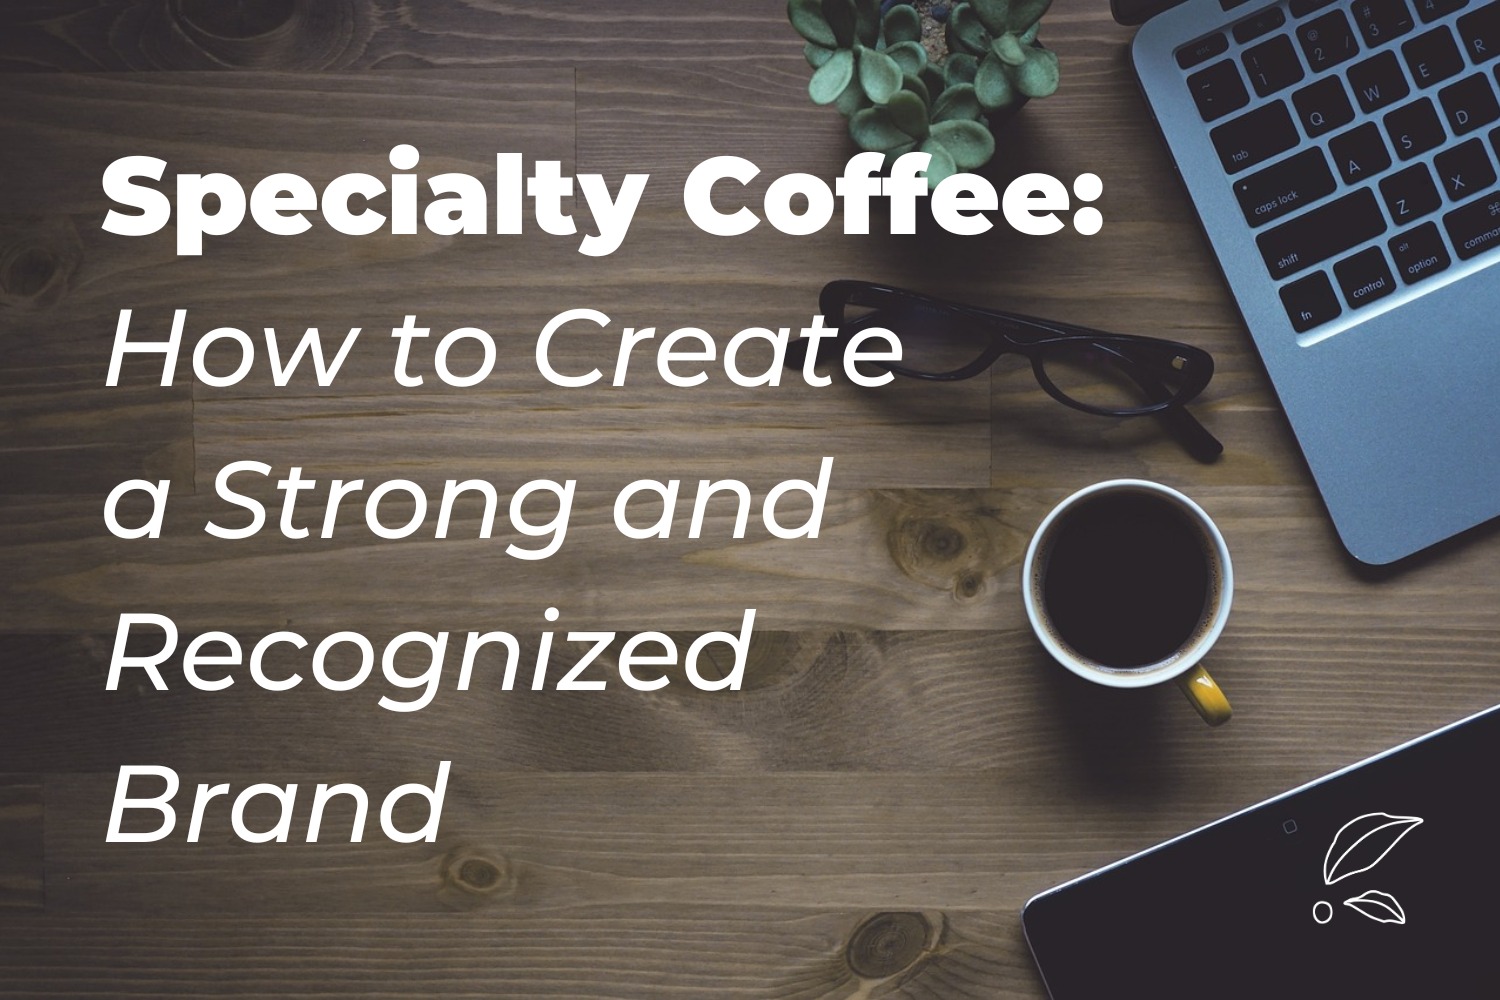 Specialty Coffee: How to Create a Strong and Recognized Brand